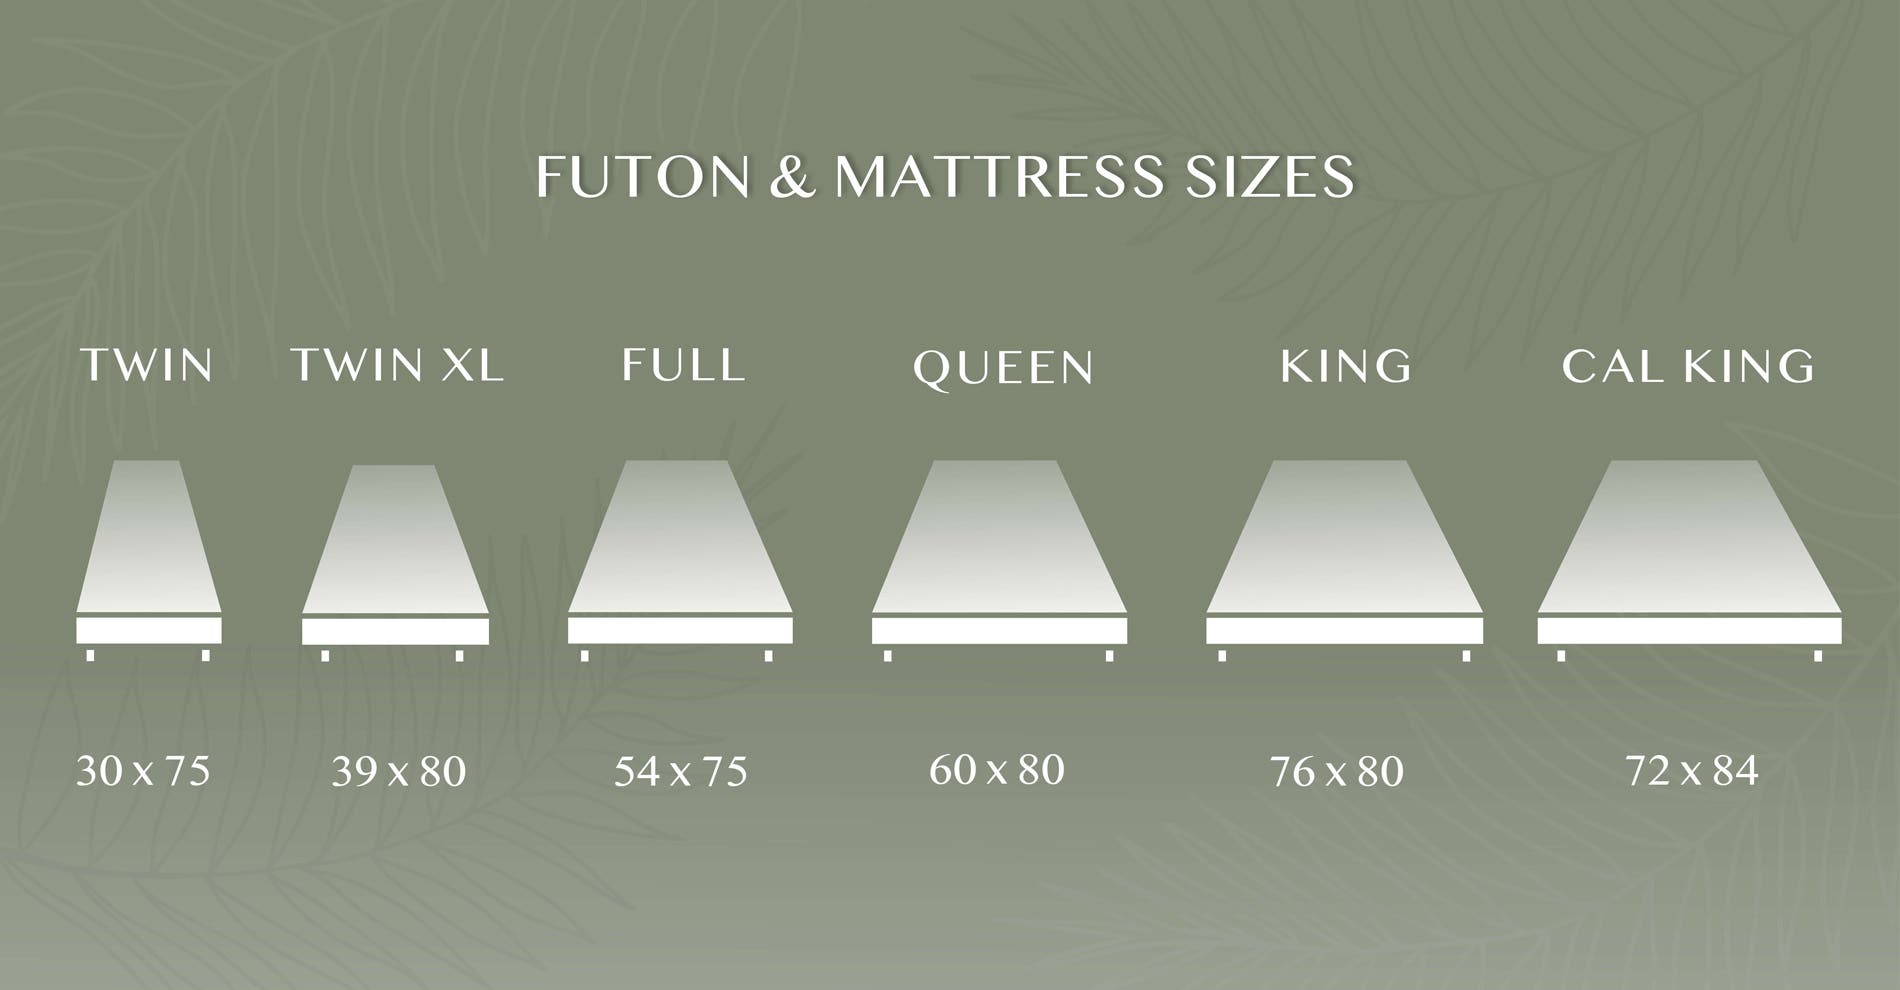 How To Choose The Right Futon Cover?